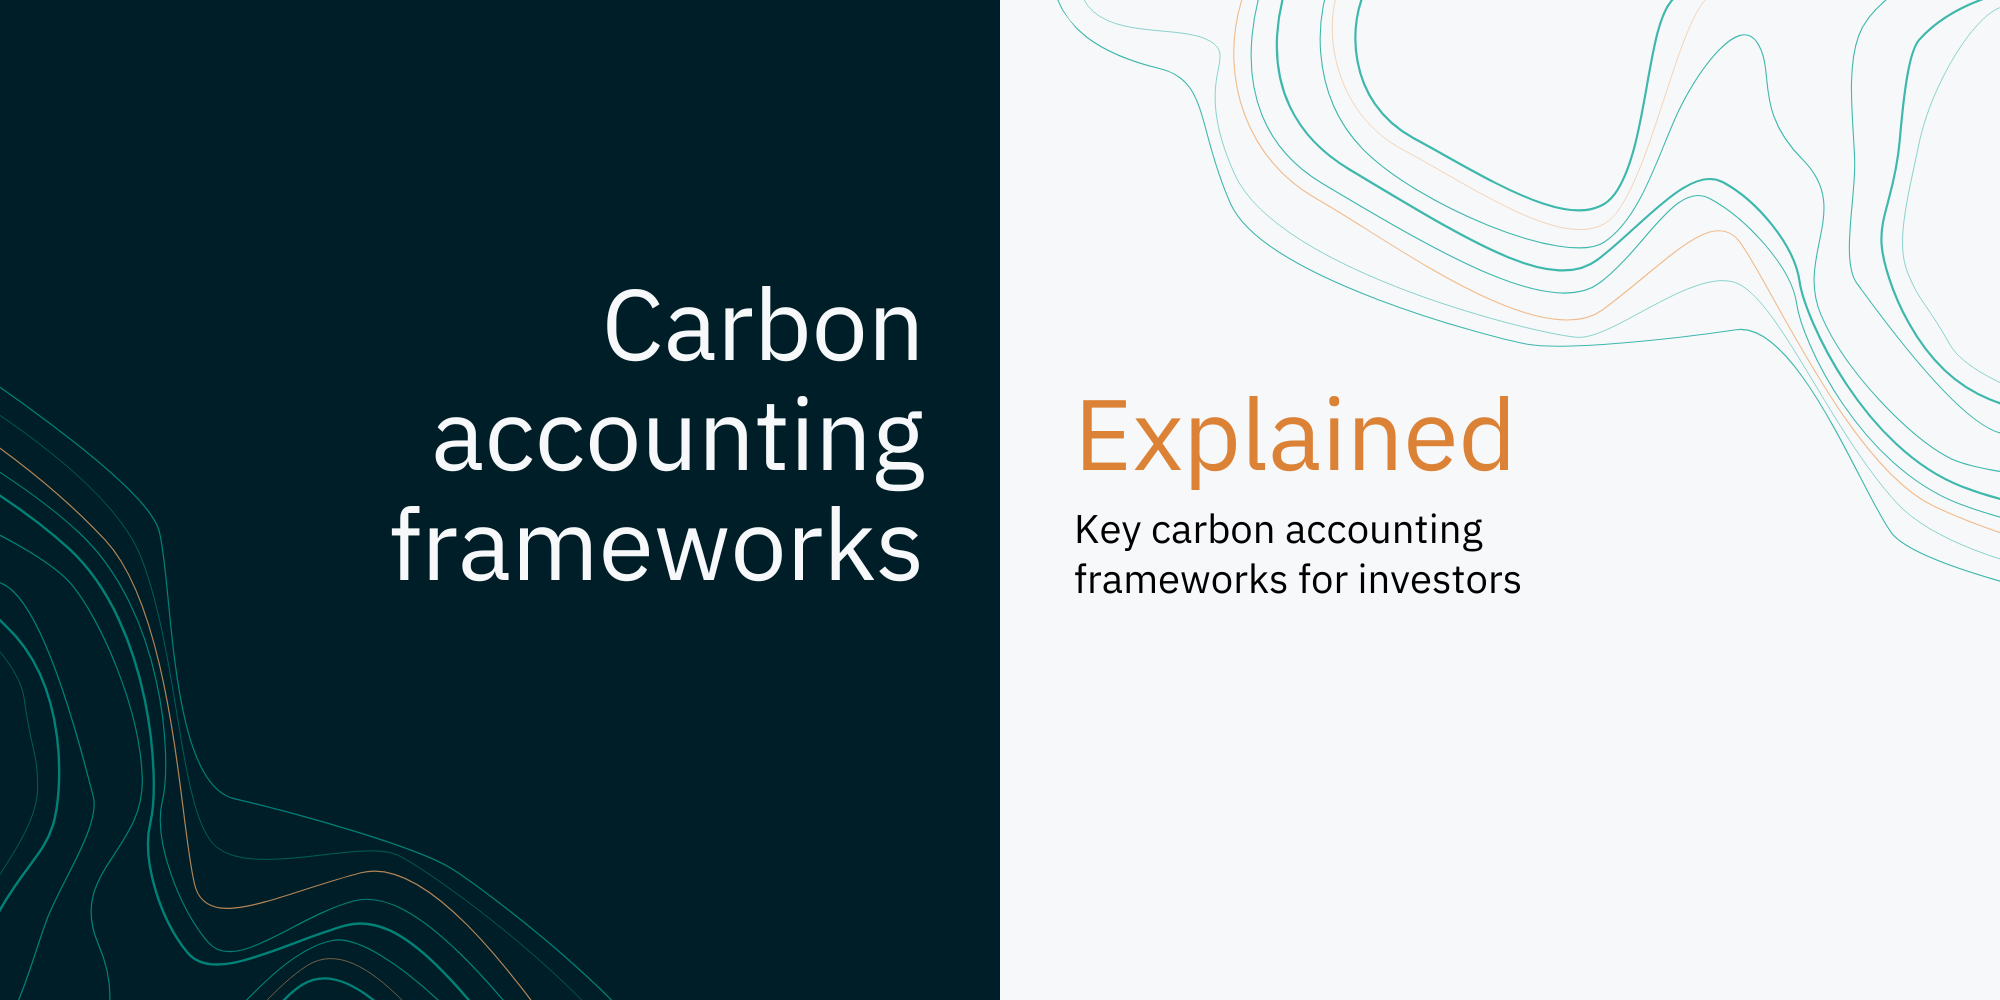 Key carbon accounting frameworks for investors, and how to use them featured image